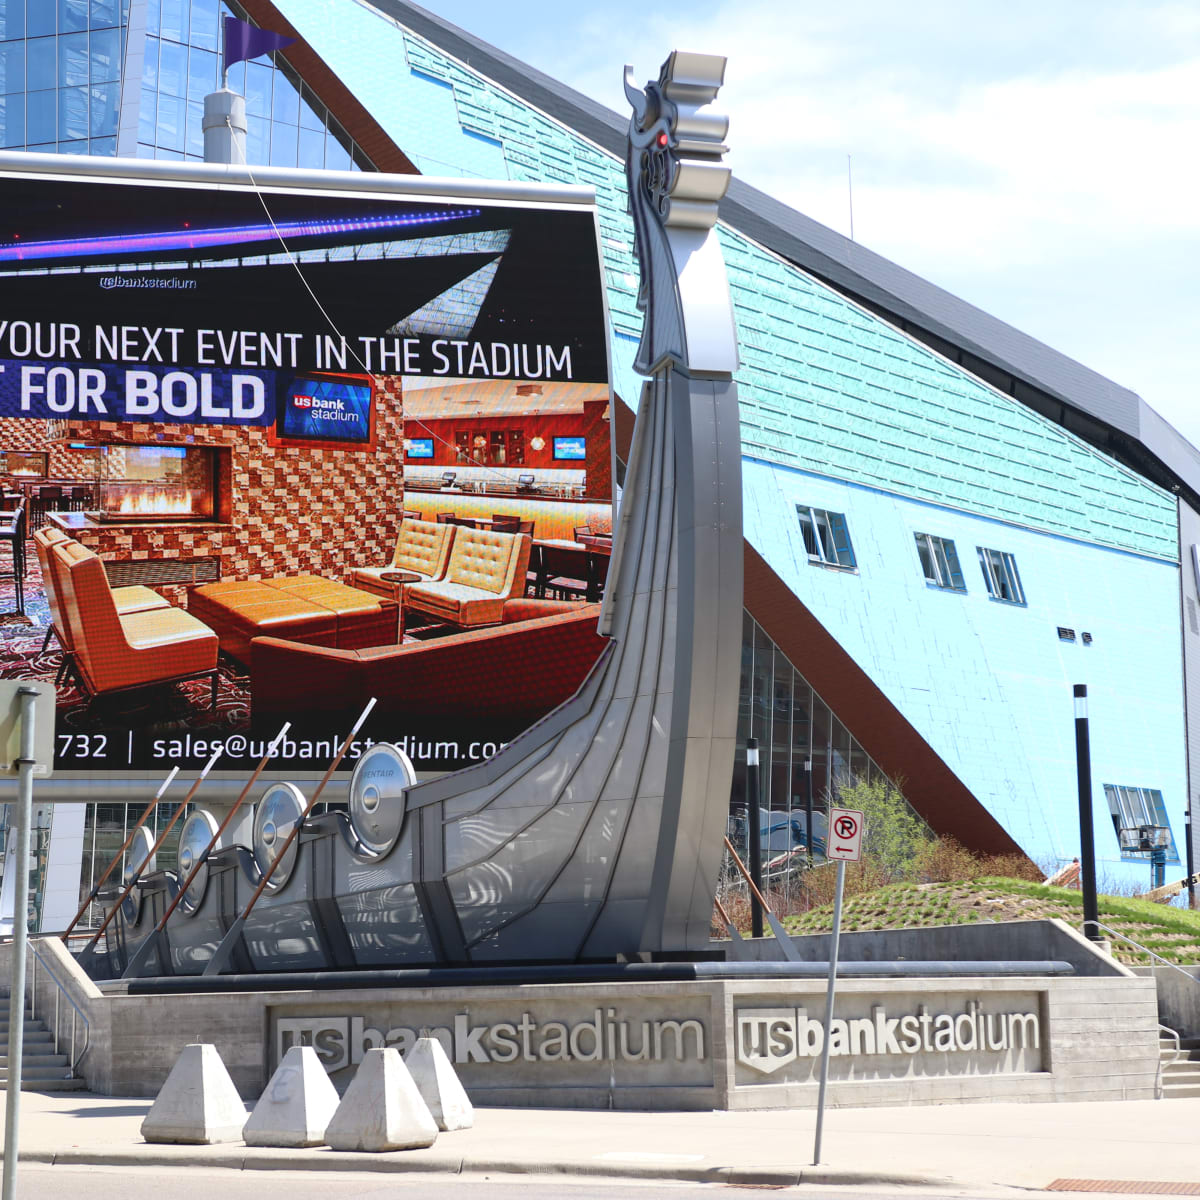 Vikings fans primed to take over luxurious $5 billion SoFi Stadium in first  visit – Twin Cities